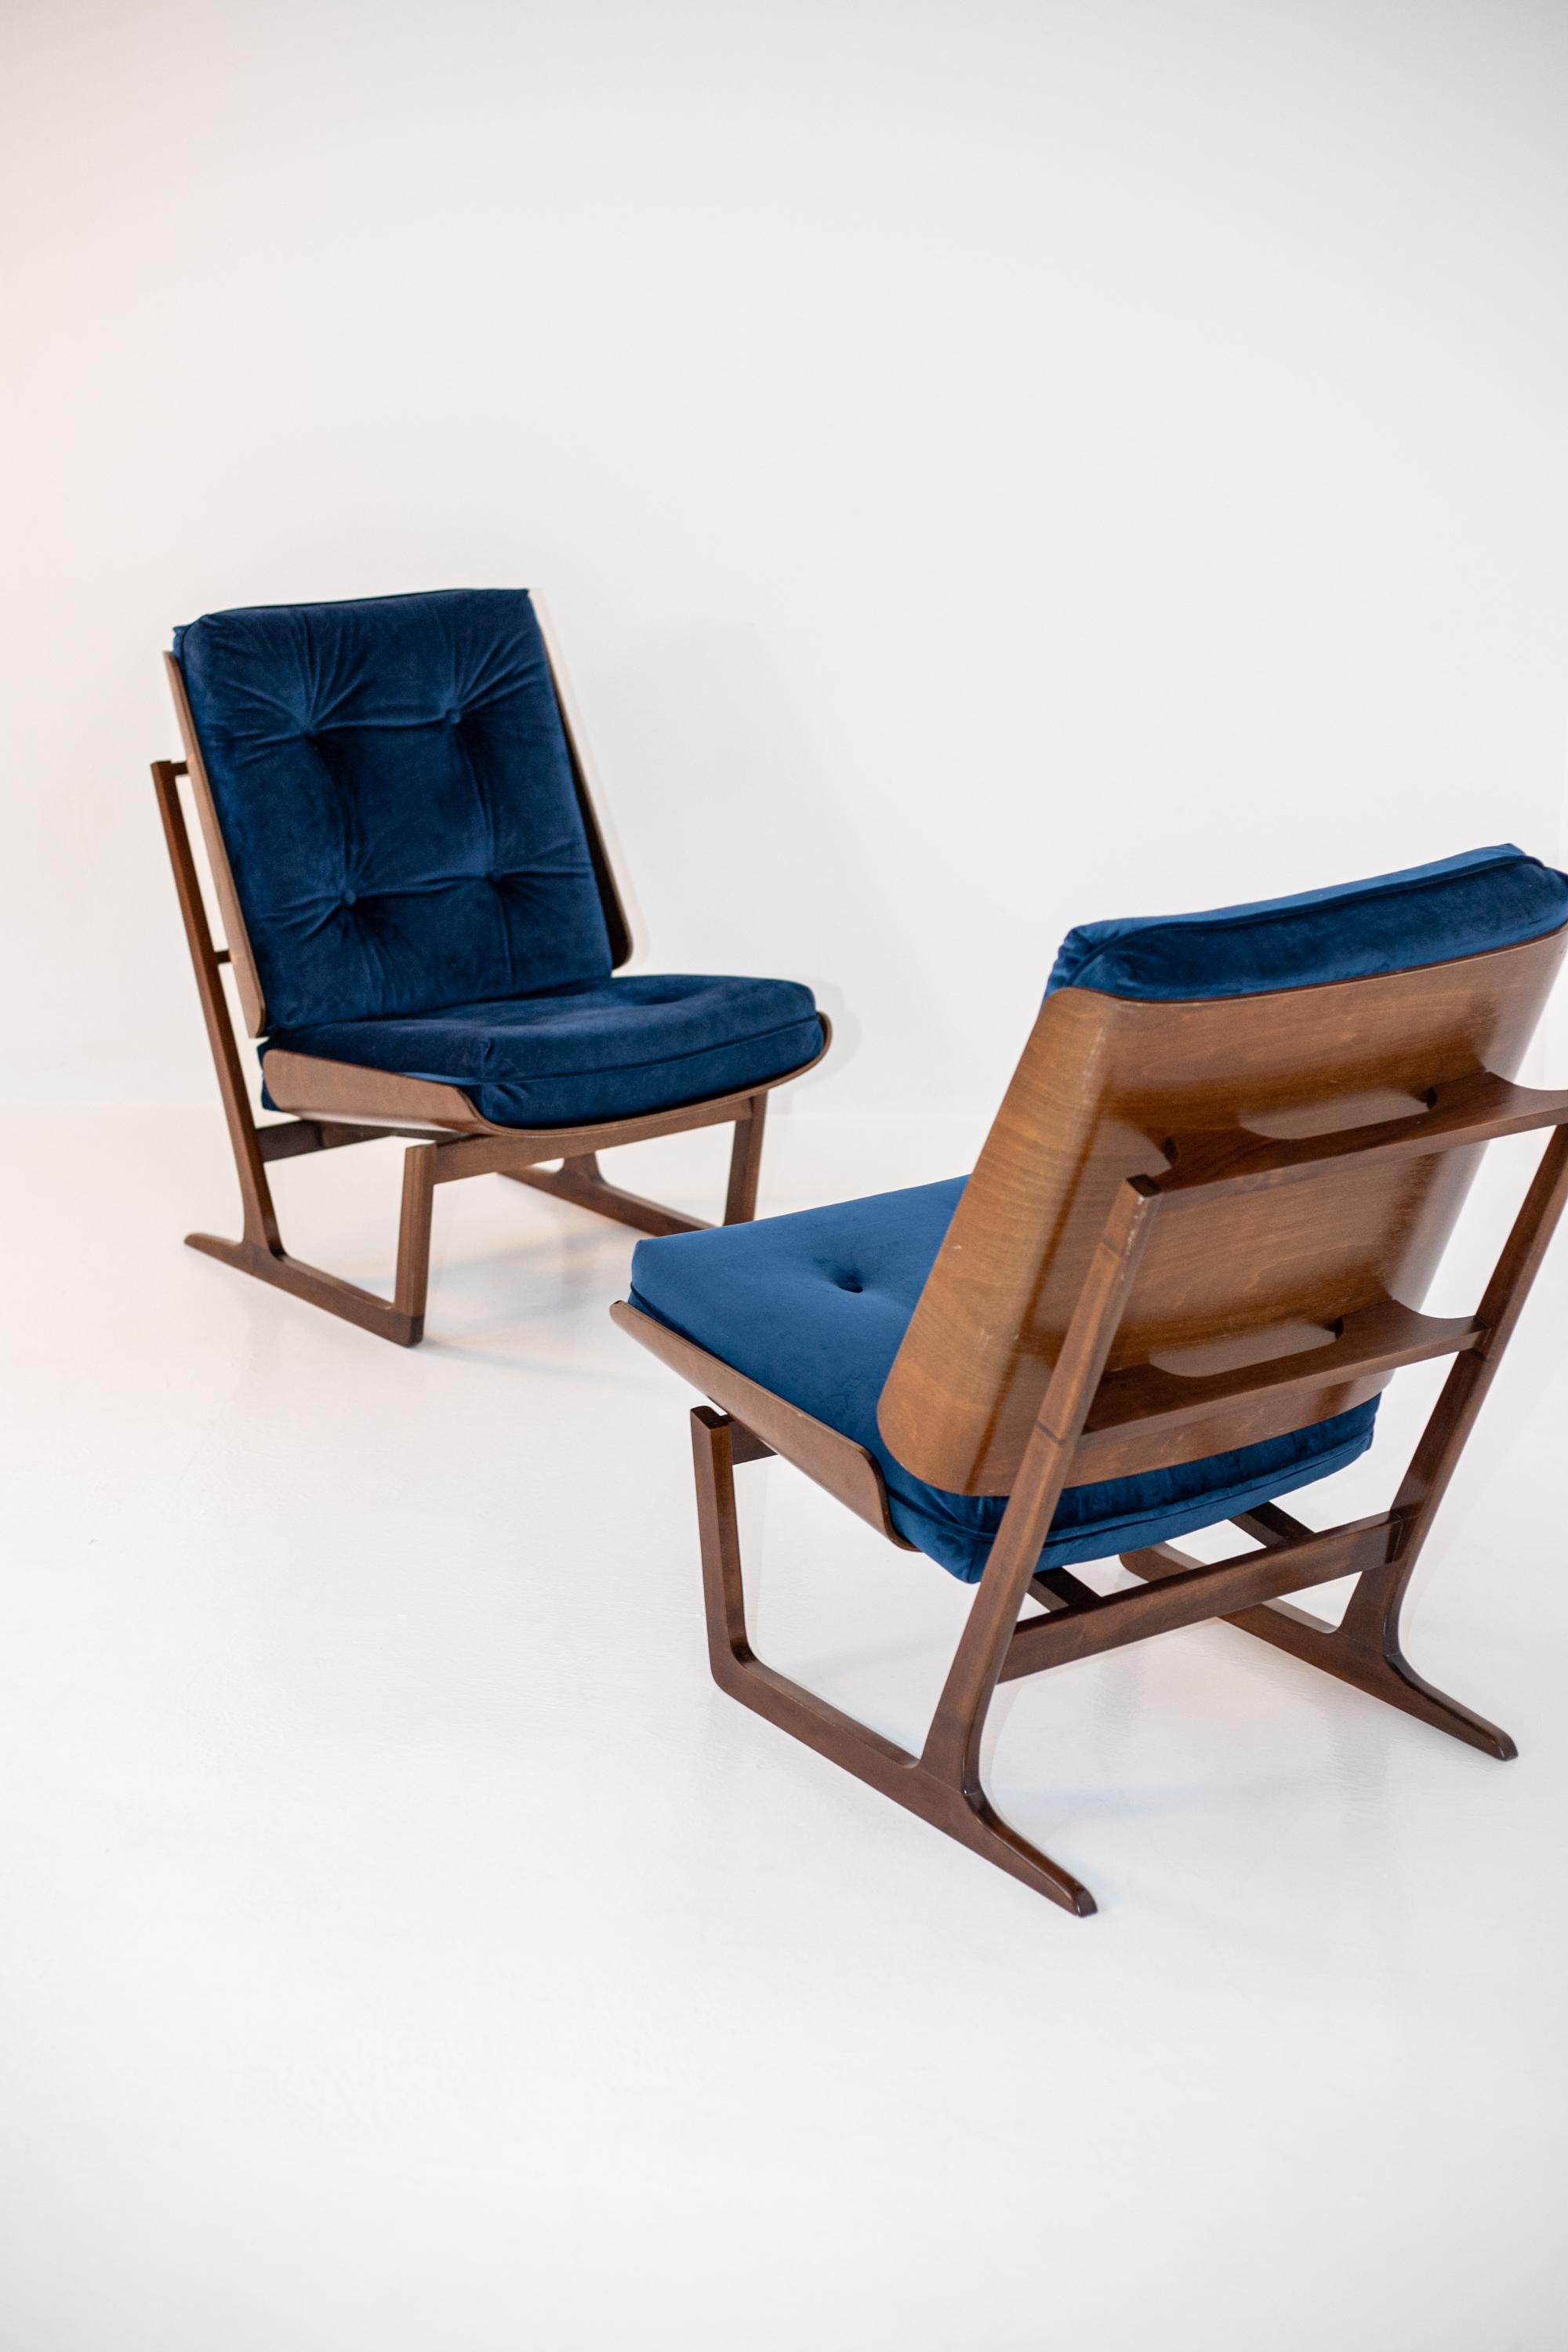 Mid-20th Century Pair of American Armchairs in Wood and Blue Velvet